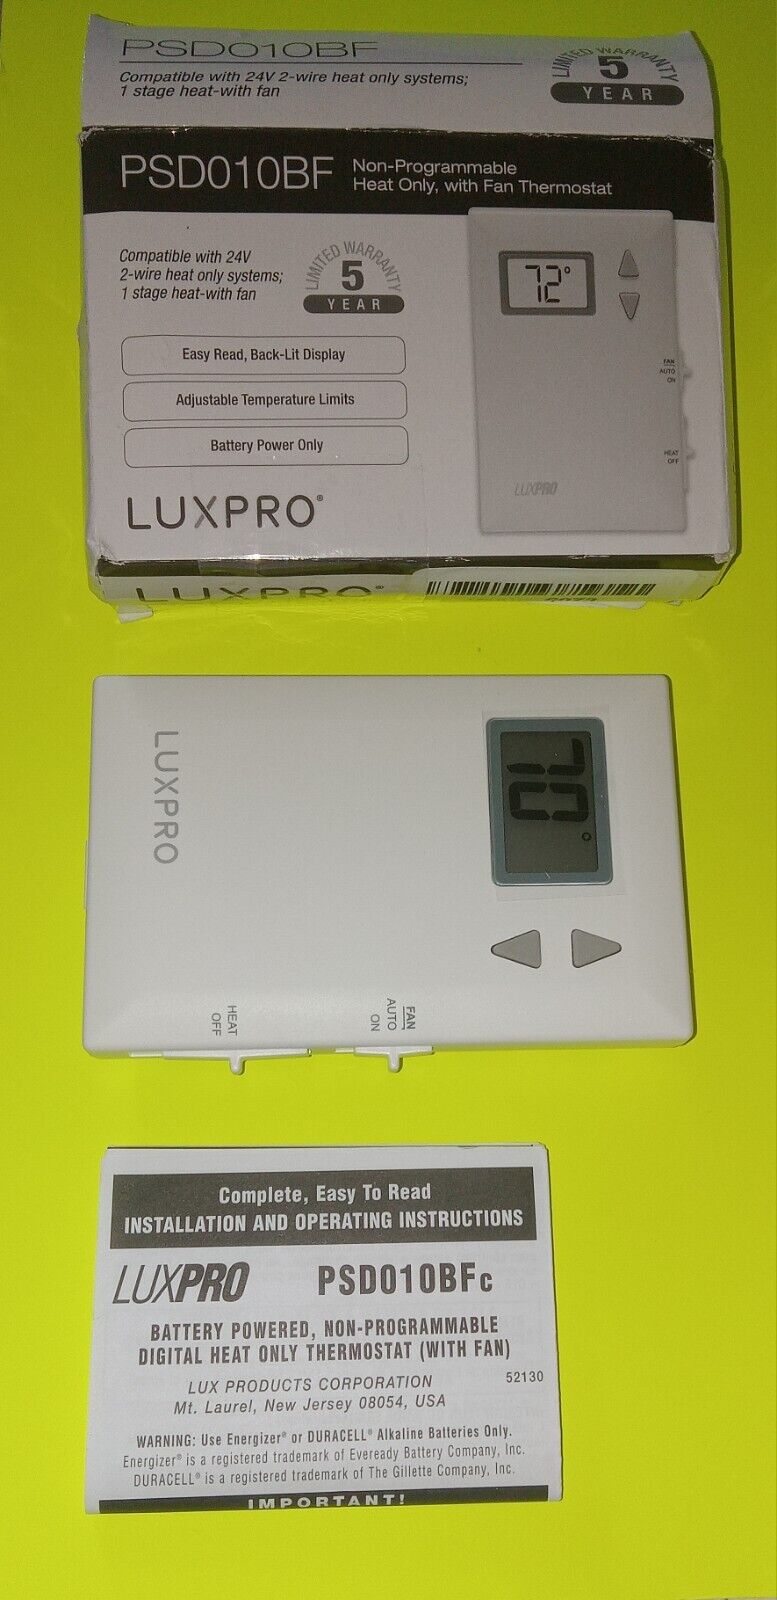 LuxPro Digital 2 Wire Heat Only Thermostat - PSD010BF  New Open Box